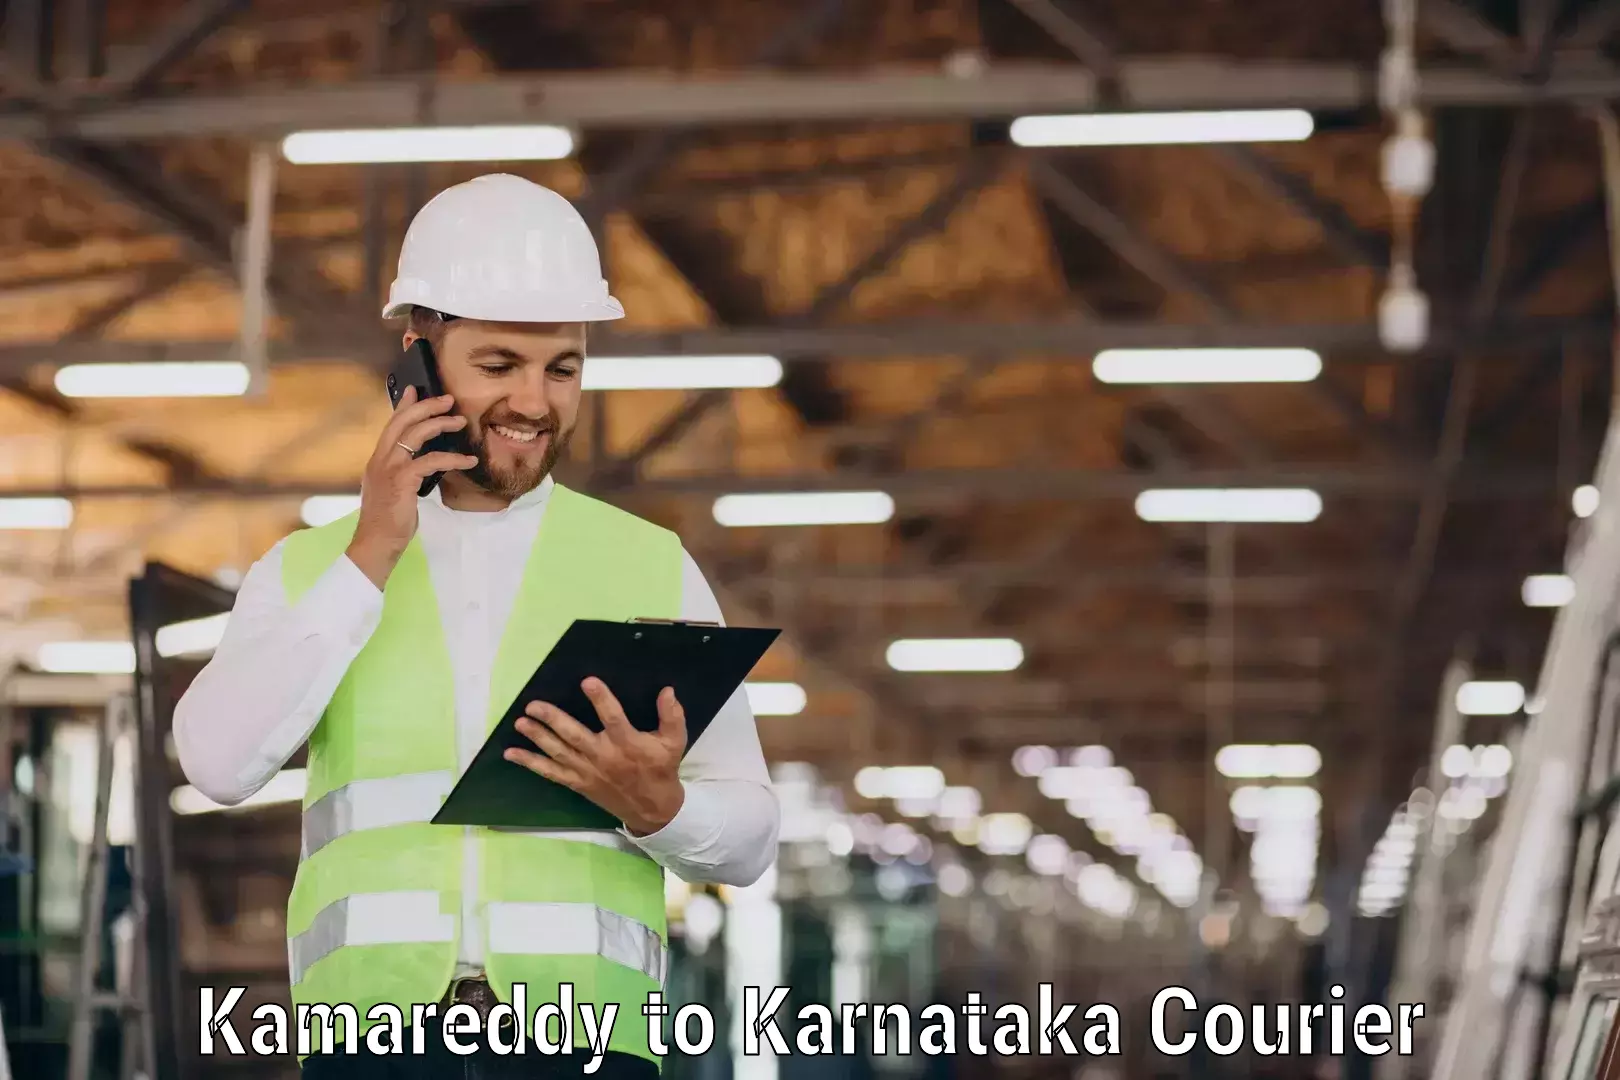 Quality courier services Kamareddy to Hagaribommanahalli